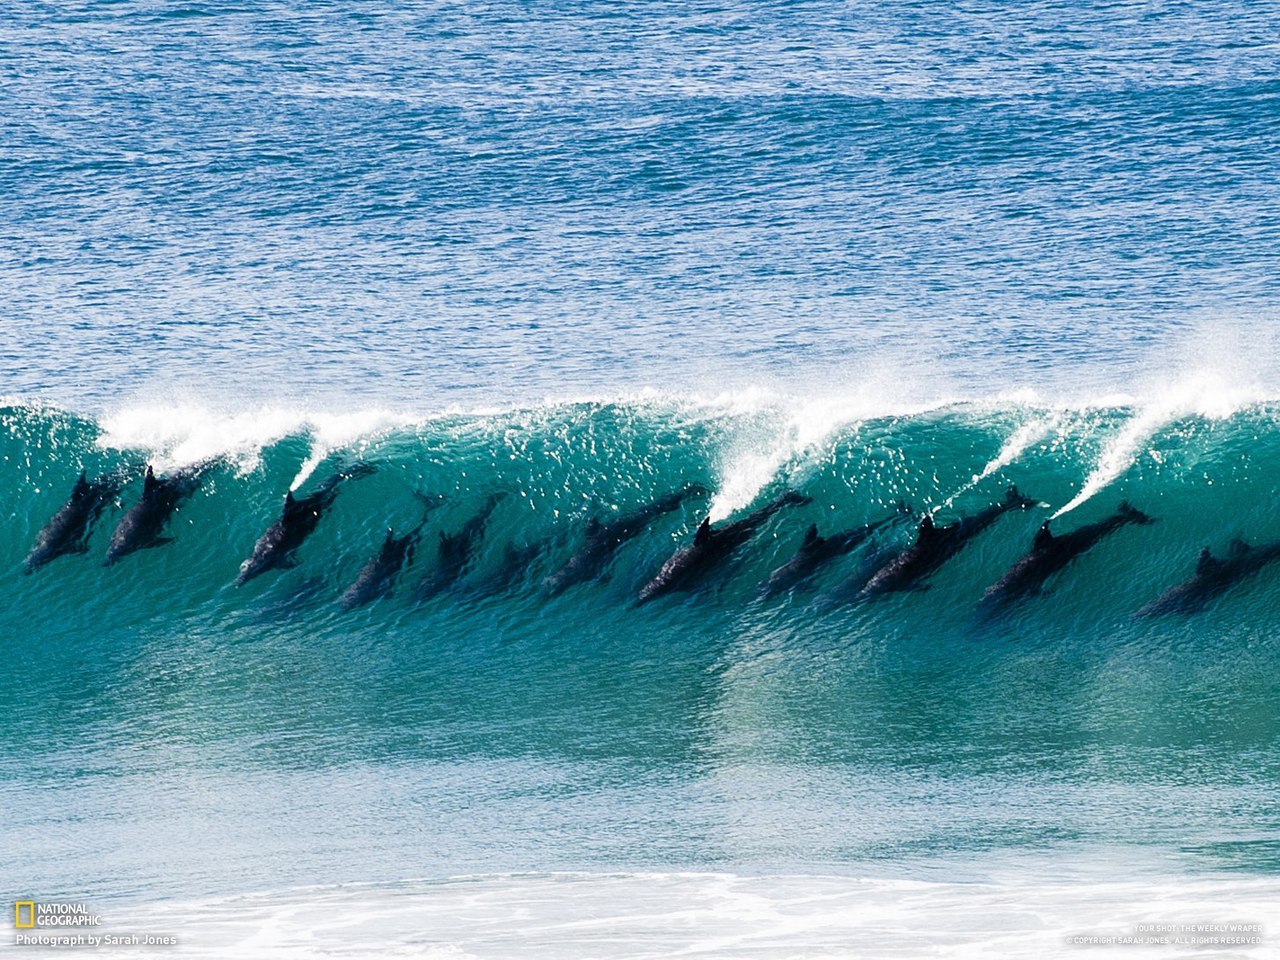 A snapshot of a dolphin pack in the wave